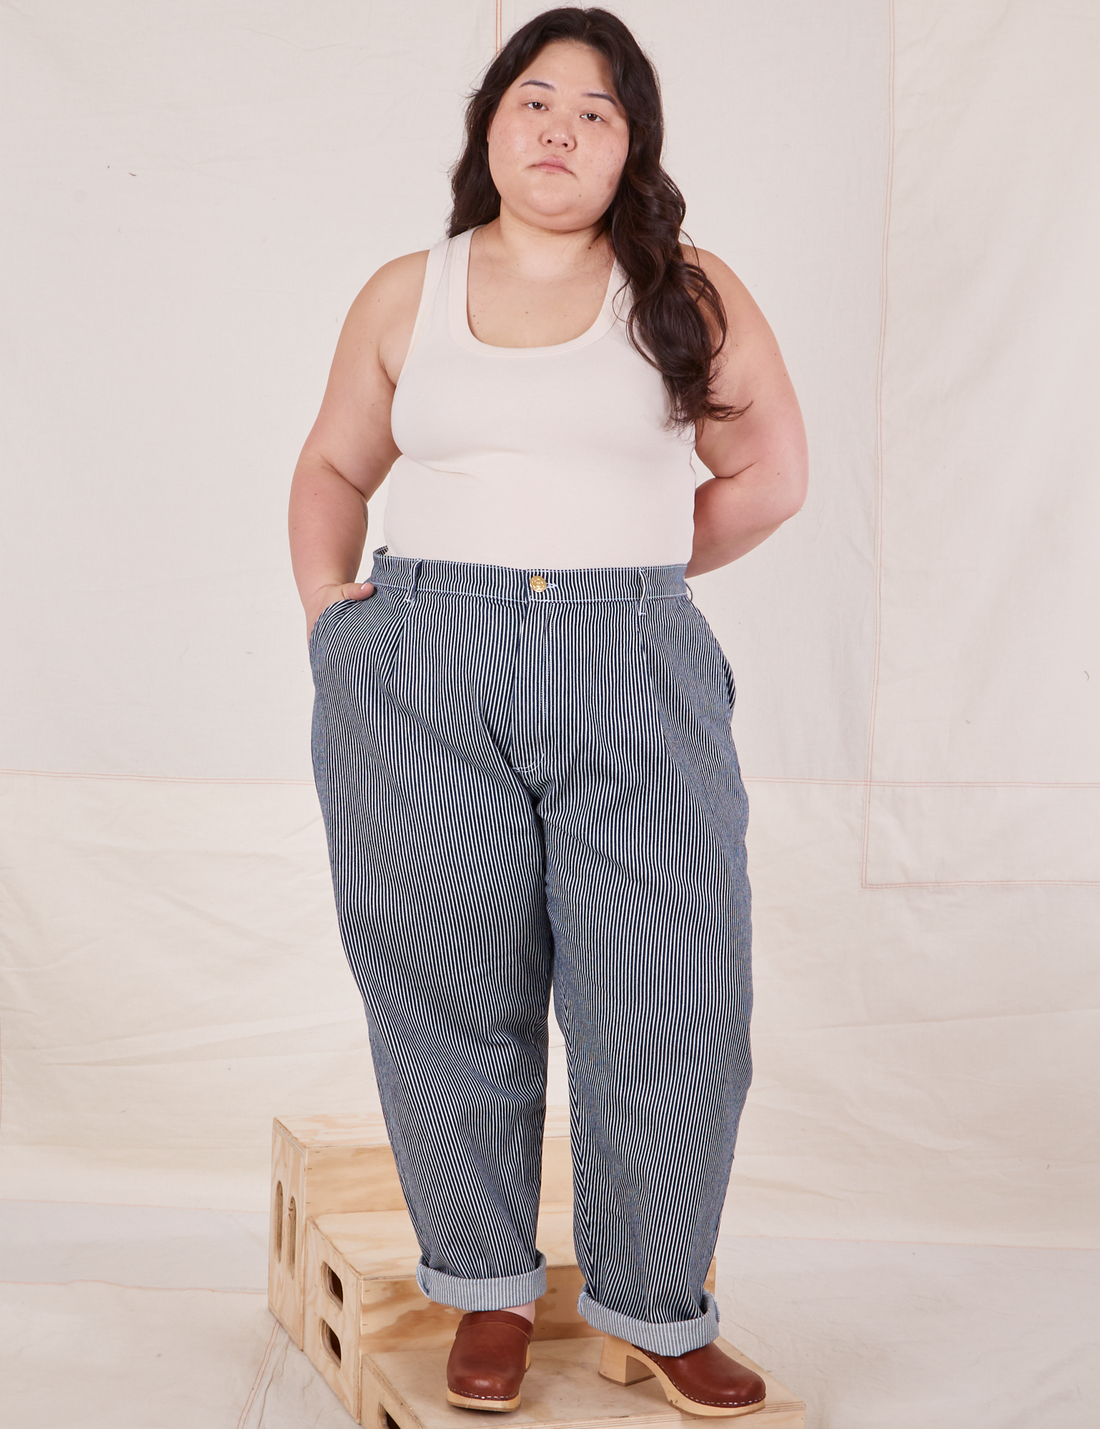 Ashley is 5'7" and wearing 1XL Denim Trouser Jeans in Railroad Stripe paired with a vintage off-white Tank Top